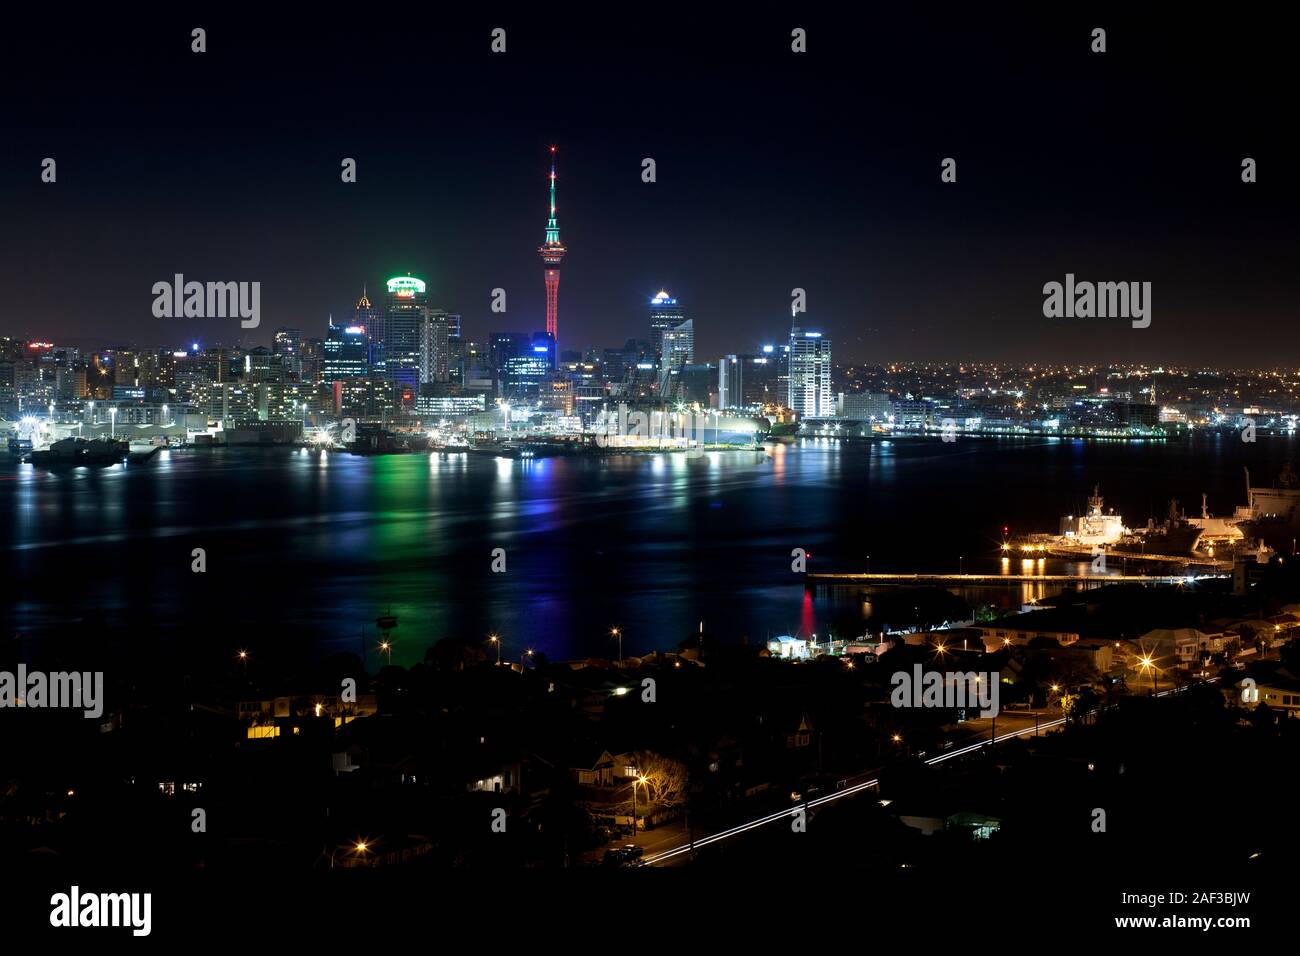 Downtown Auckland city viewed across Waitemata Harbour from Mount Victoria, Devonport at night. New Zealand Stock Photo